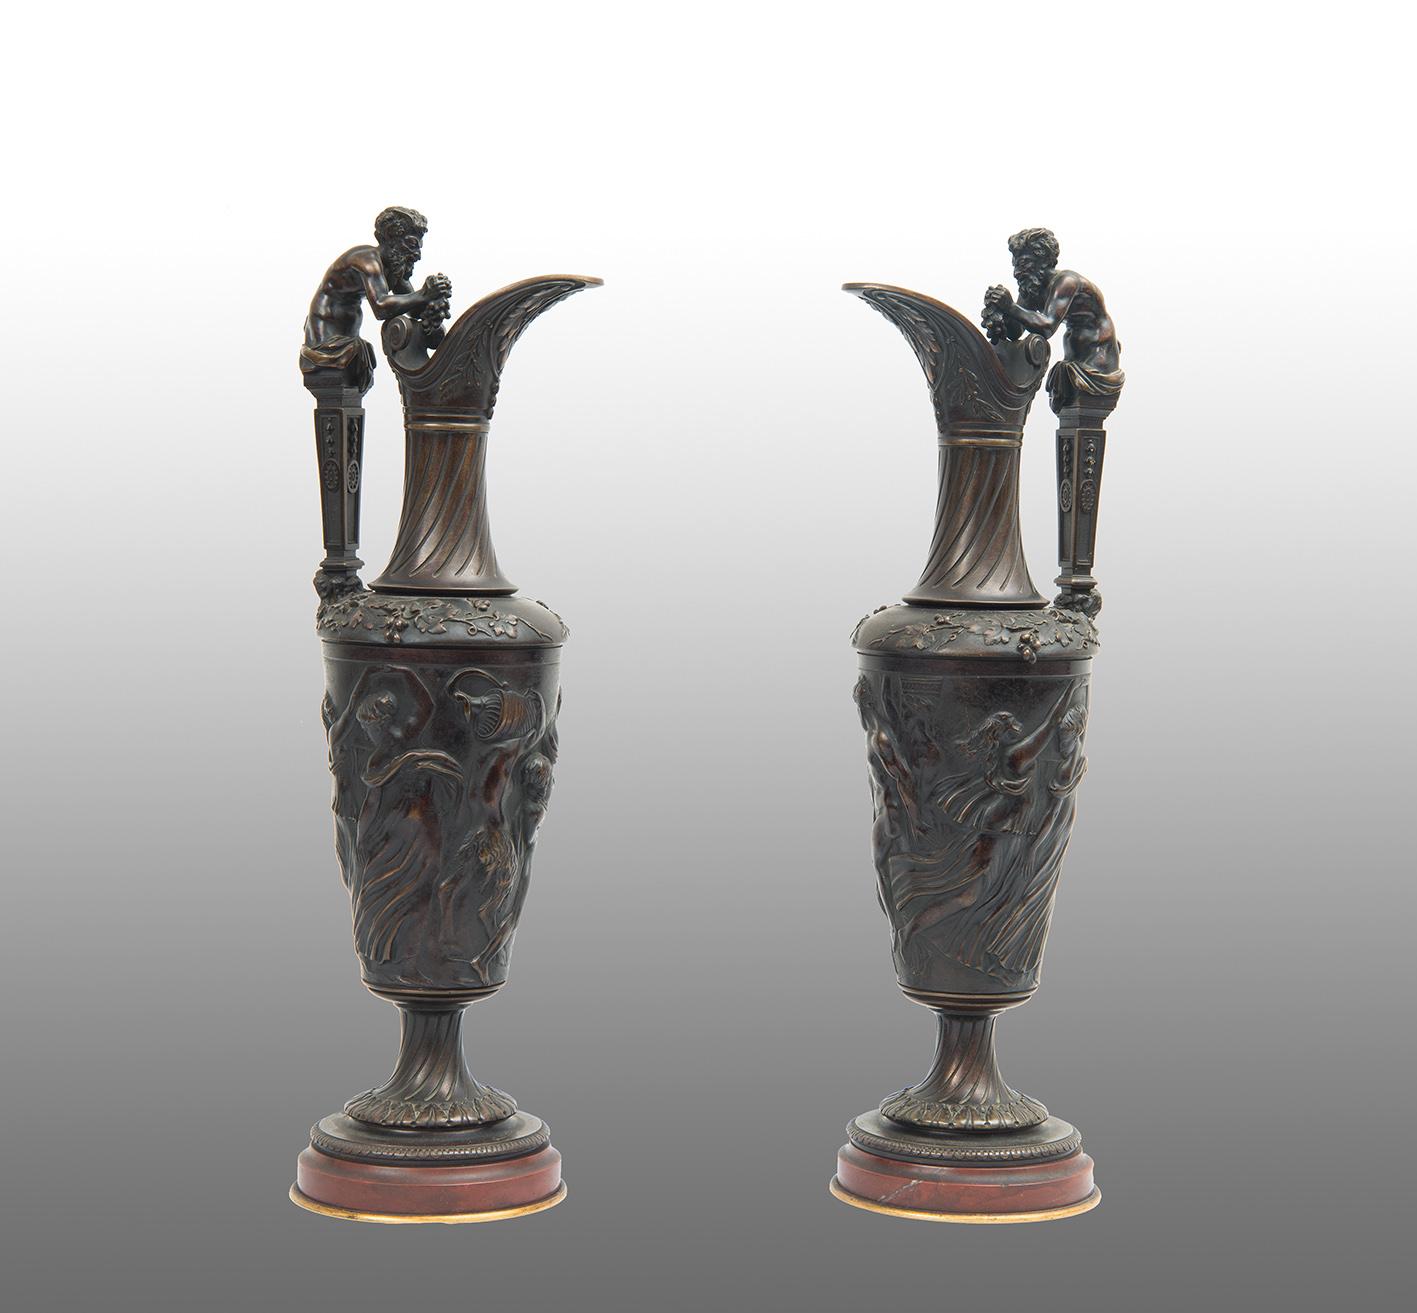 Pair of satin-finished bronze antique pourers - Art by Unknown